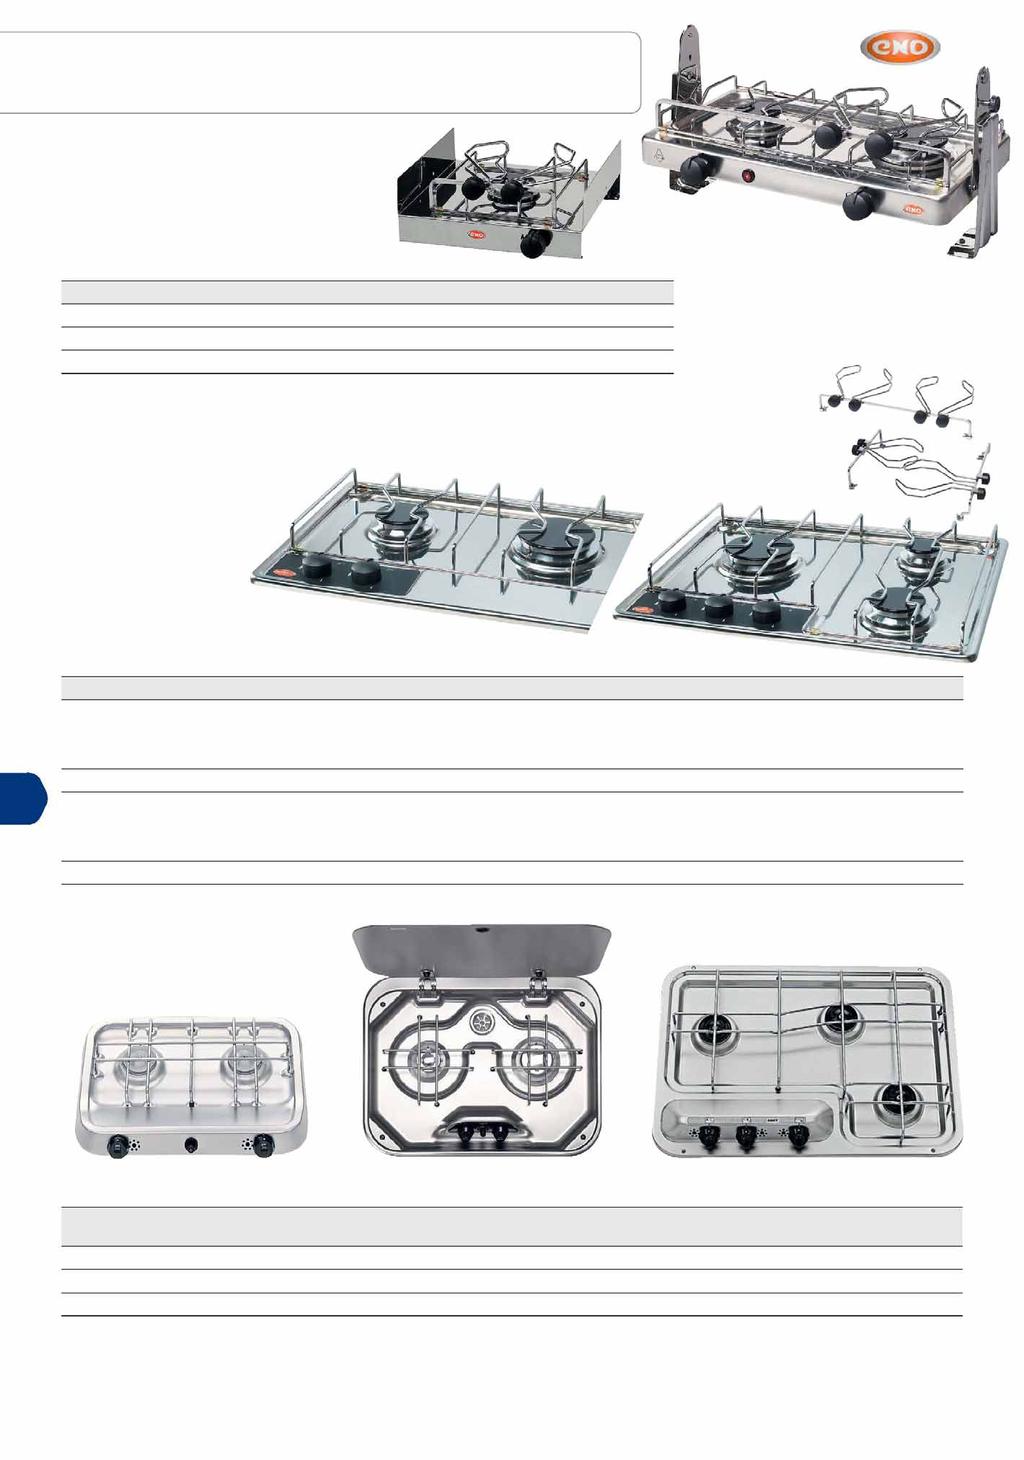 Hob plates Stainless steel cradle hob 1 and 2-burner st. steel hobs with gas safety devices. omply with E standard. utane-propane gas supply. Safety thermocouple.